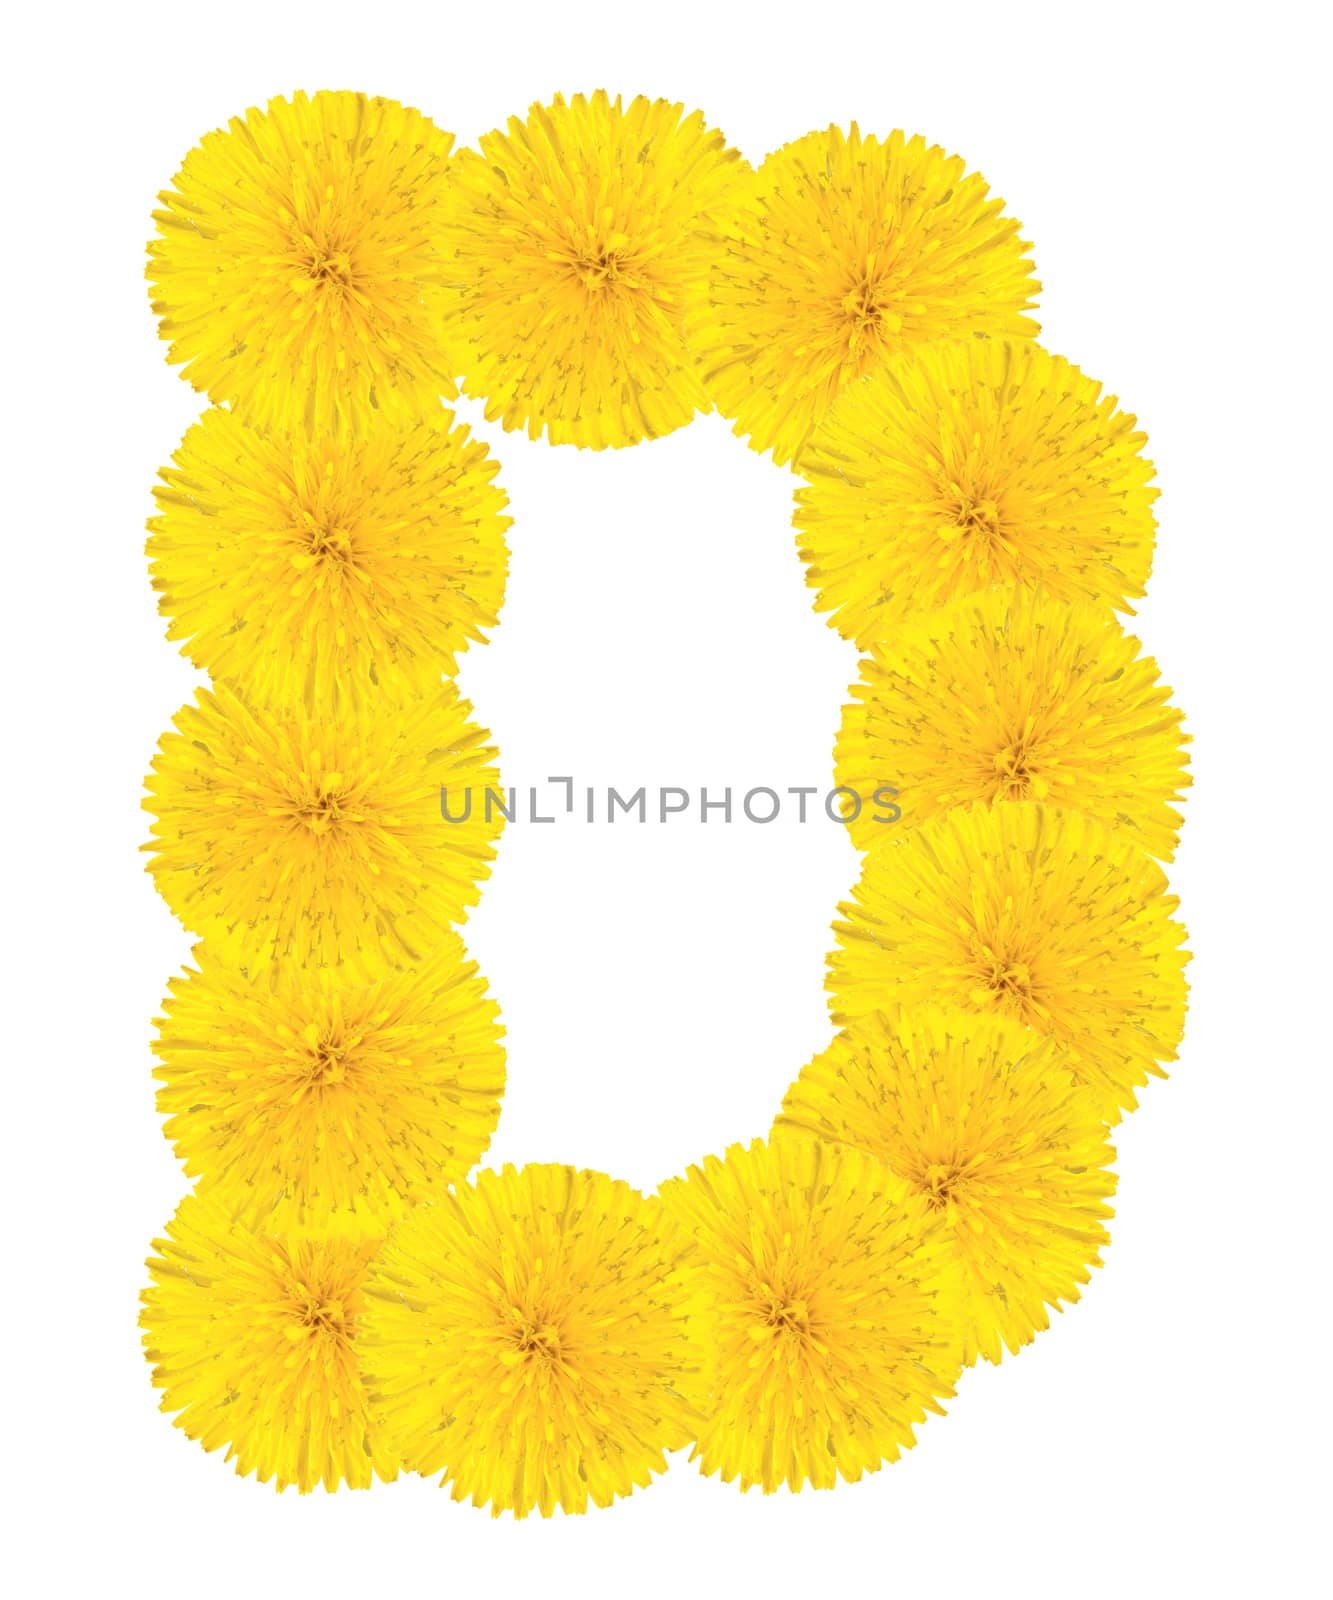 Letter D made from dandelion flowers isolated on white background